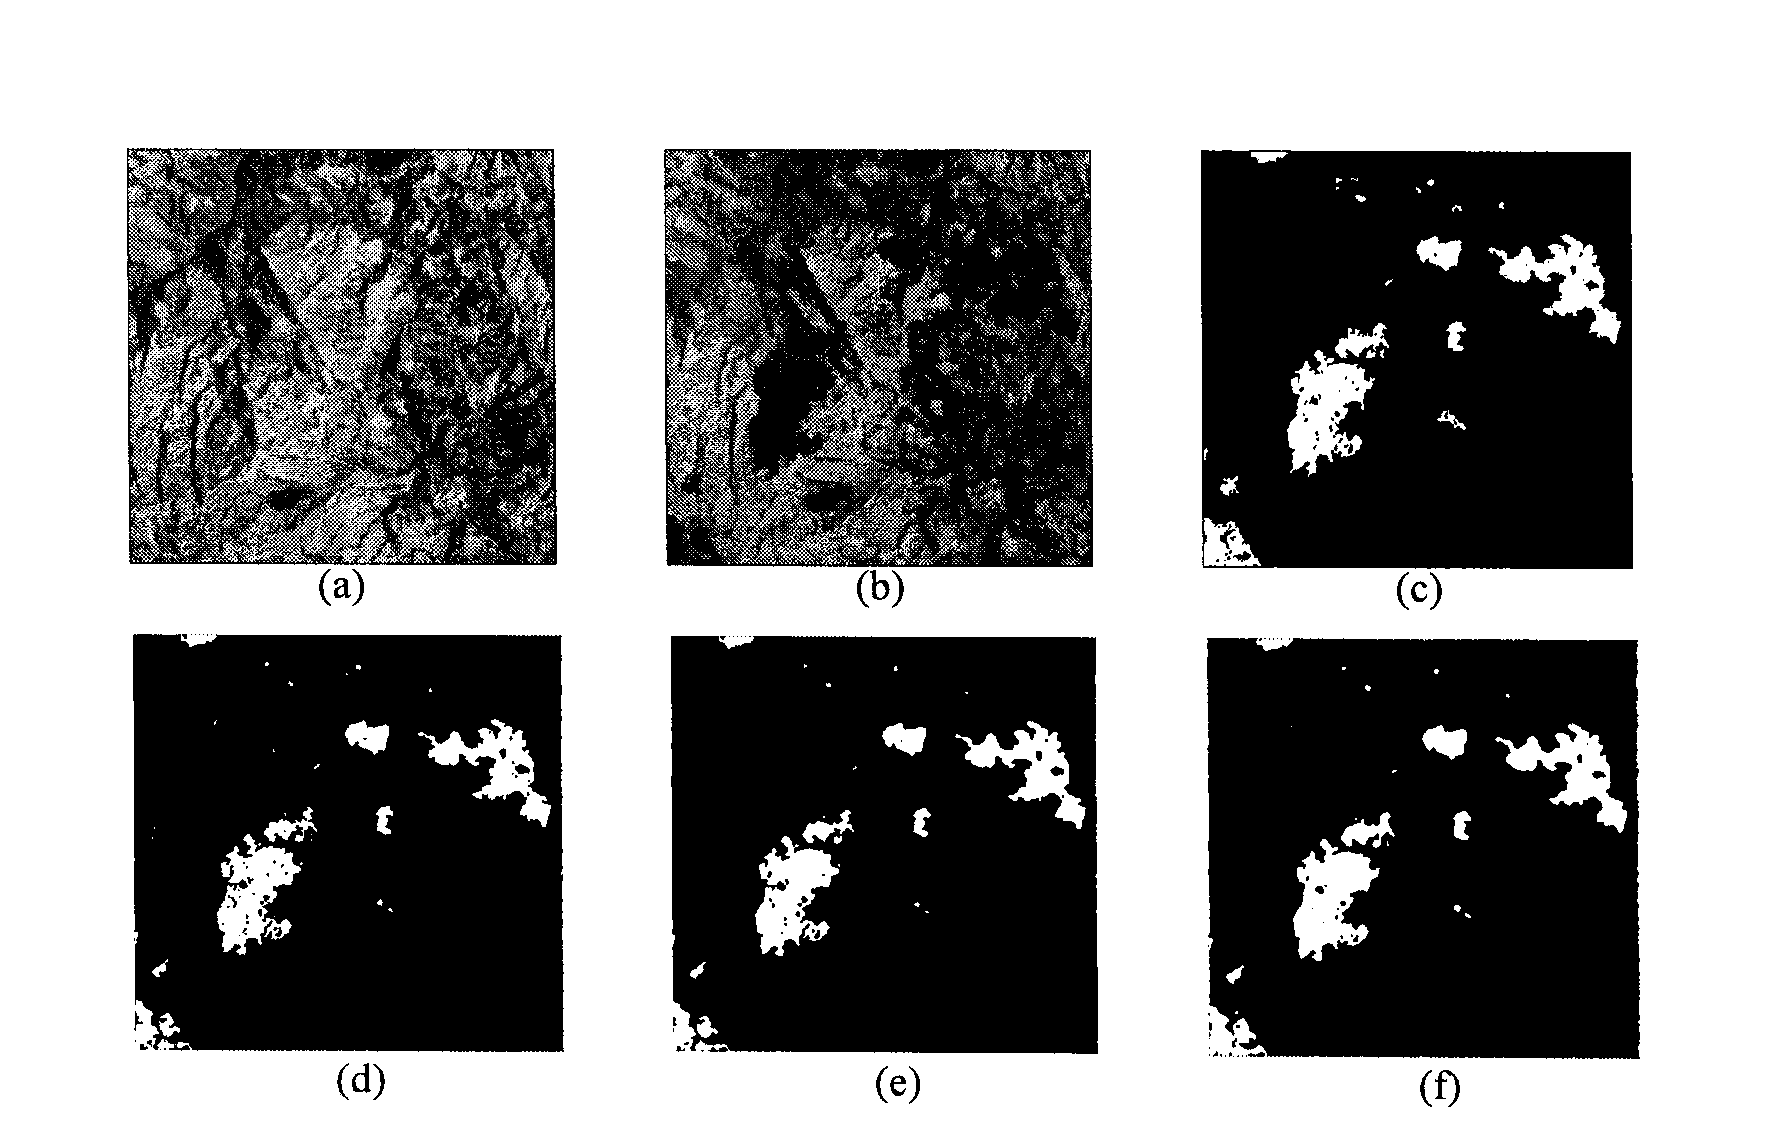 SAR (synthetic aperture radar) image change detection method combining multi-threshold segmentation with fuzzy clustering